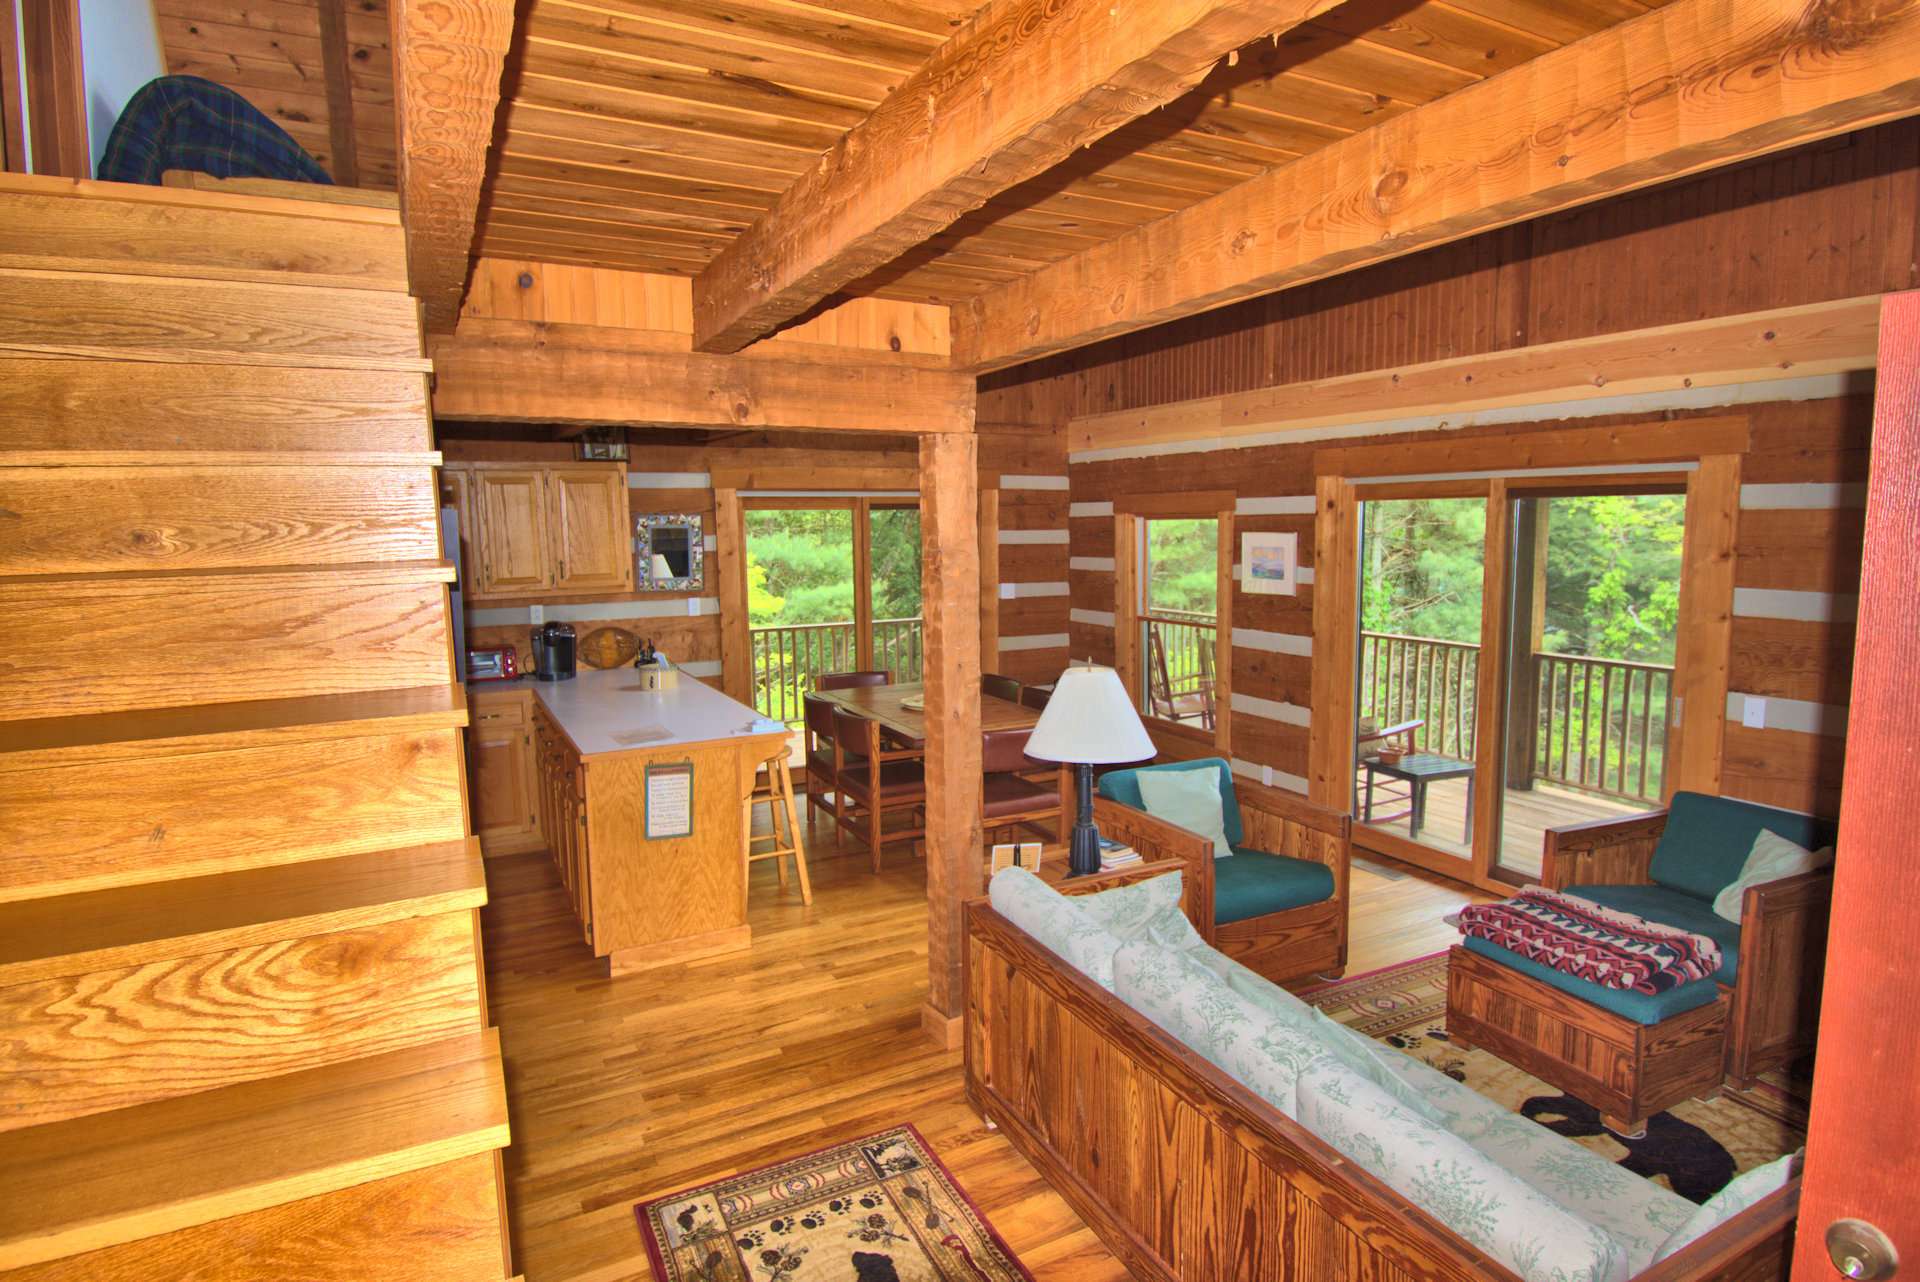 This cozy log cabin features an open great room with vaulted ceiling and plenty of windows filling the cabin with light.